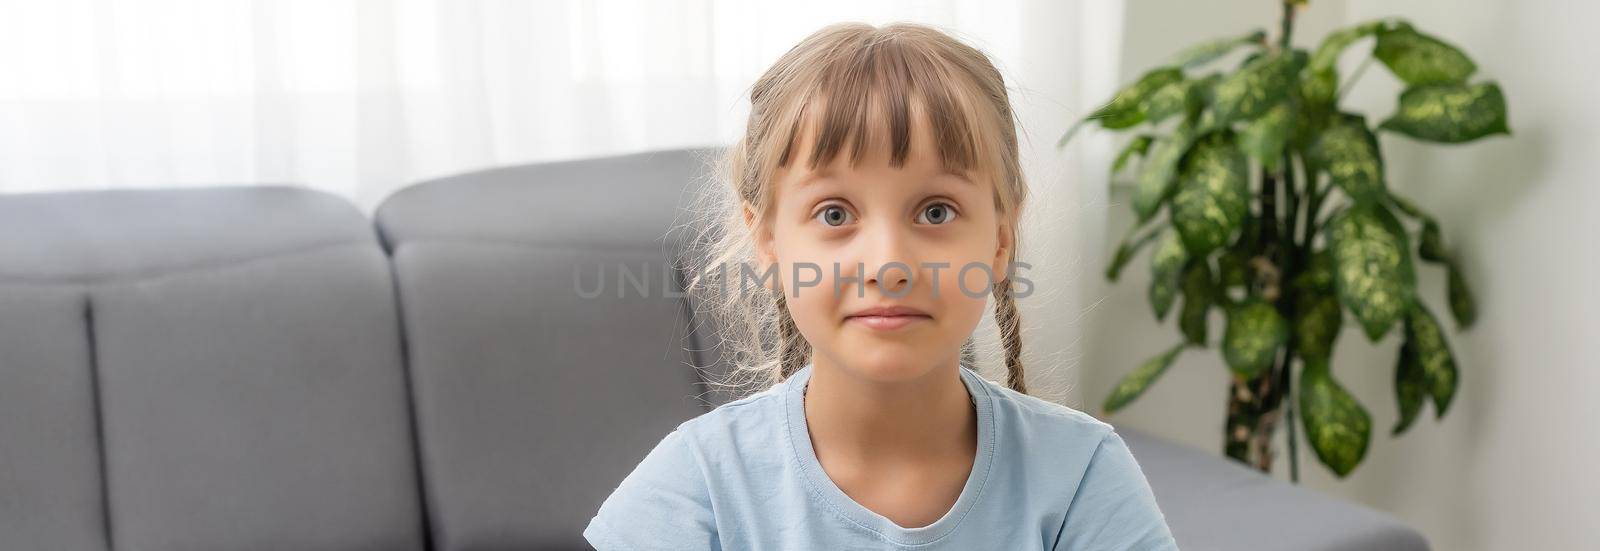 Adorable cute little vlogger looking at webcam, smiling child girl talking to camera making video call vlog communicating online sitting on couch at home, happy preschool kid headshot portrait. by Andelov13